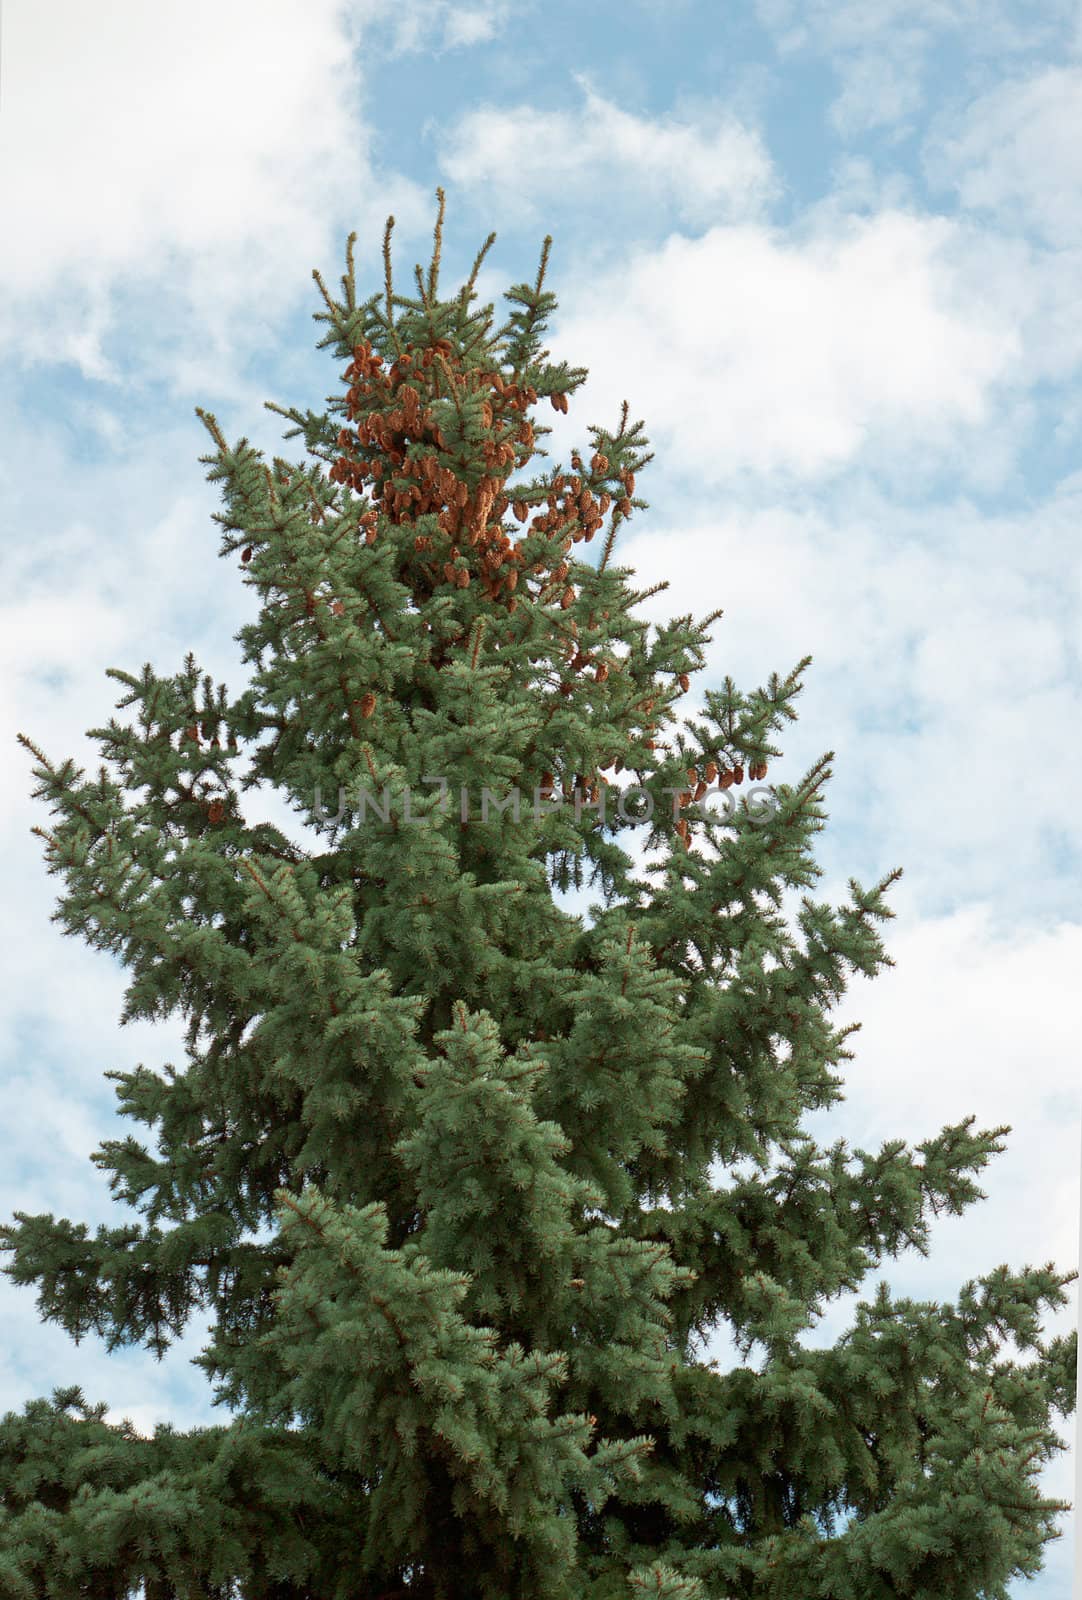 The high green tree with cones on top